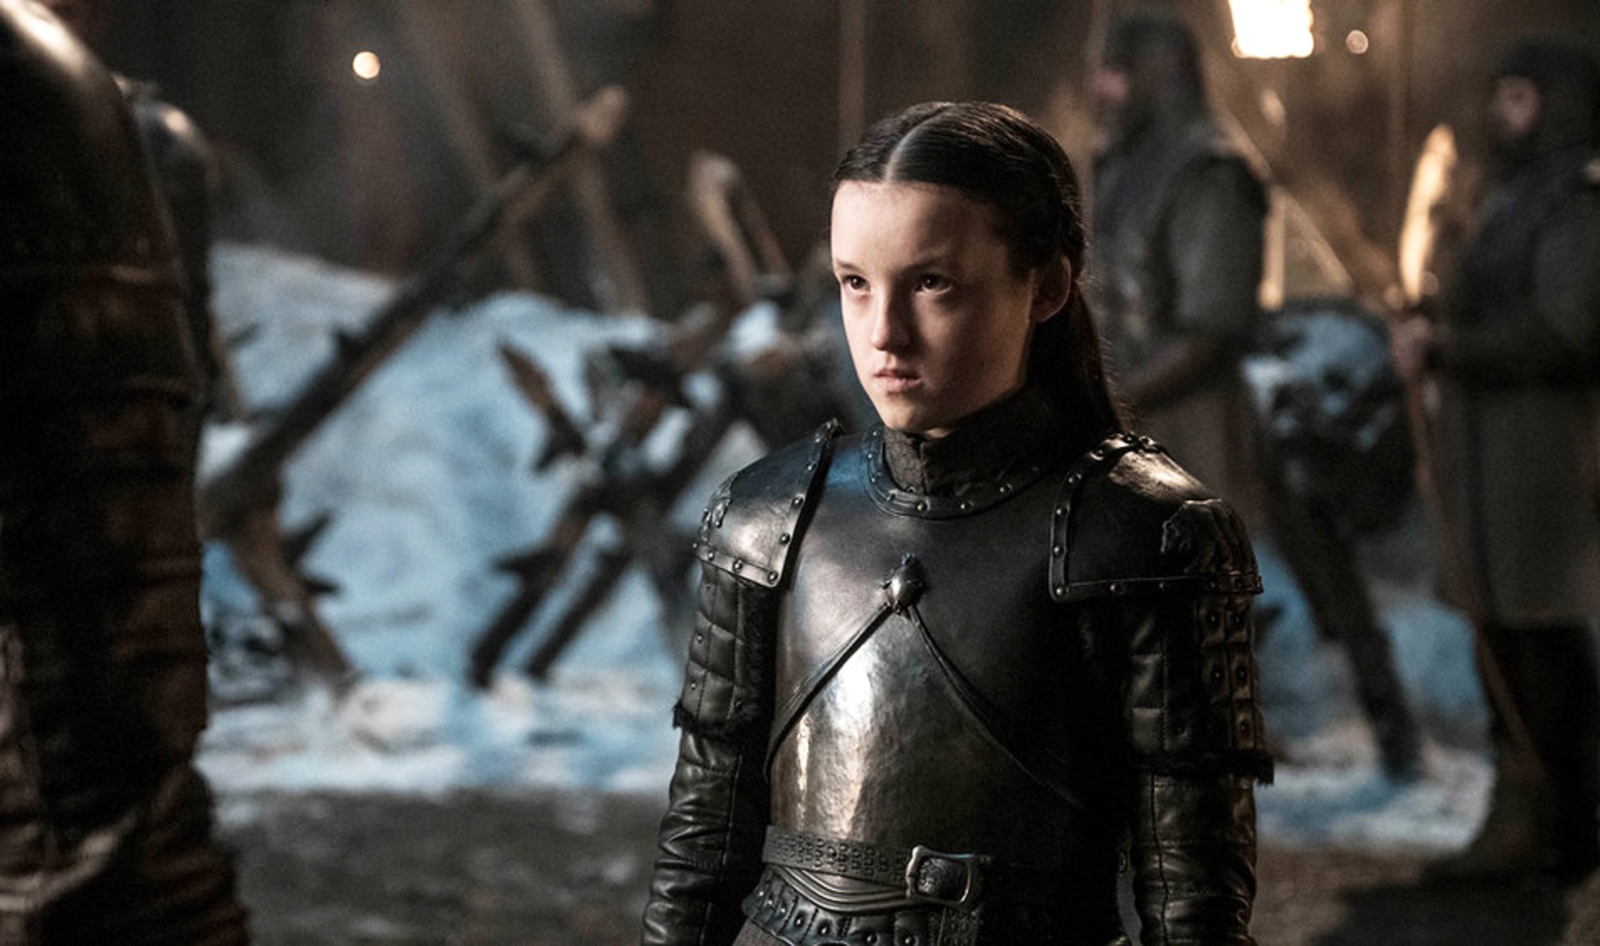 Game of Thrones’ Lyanna Mormont Battles for Humanity On-Screen and Fights for Animals in Real Life